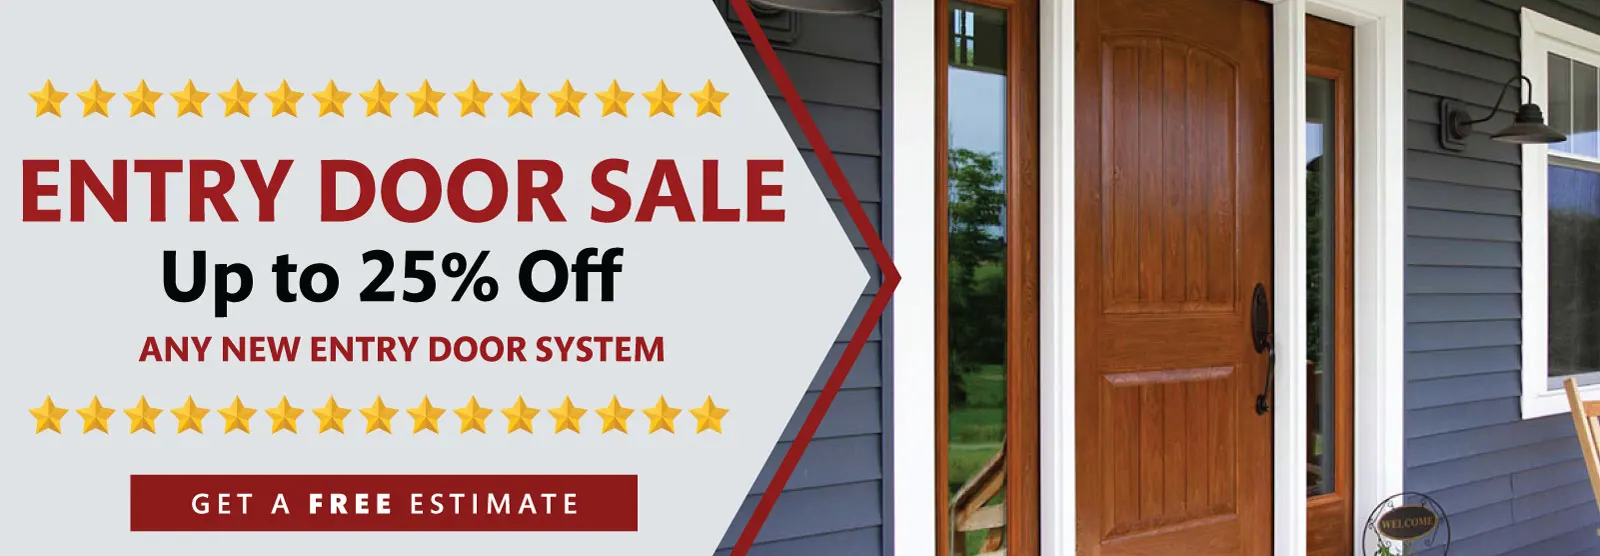 ENTRY DOOR SALE! UP TO $700 OFF ANY NEW ENTRY DOOR SYSTEM